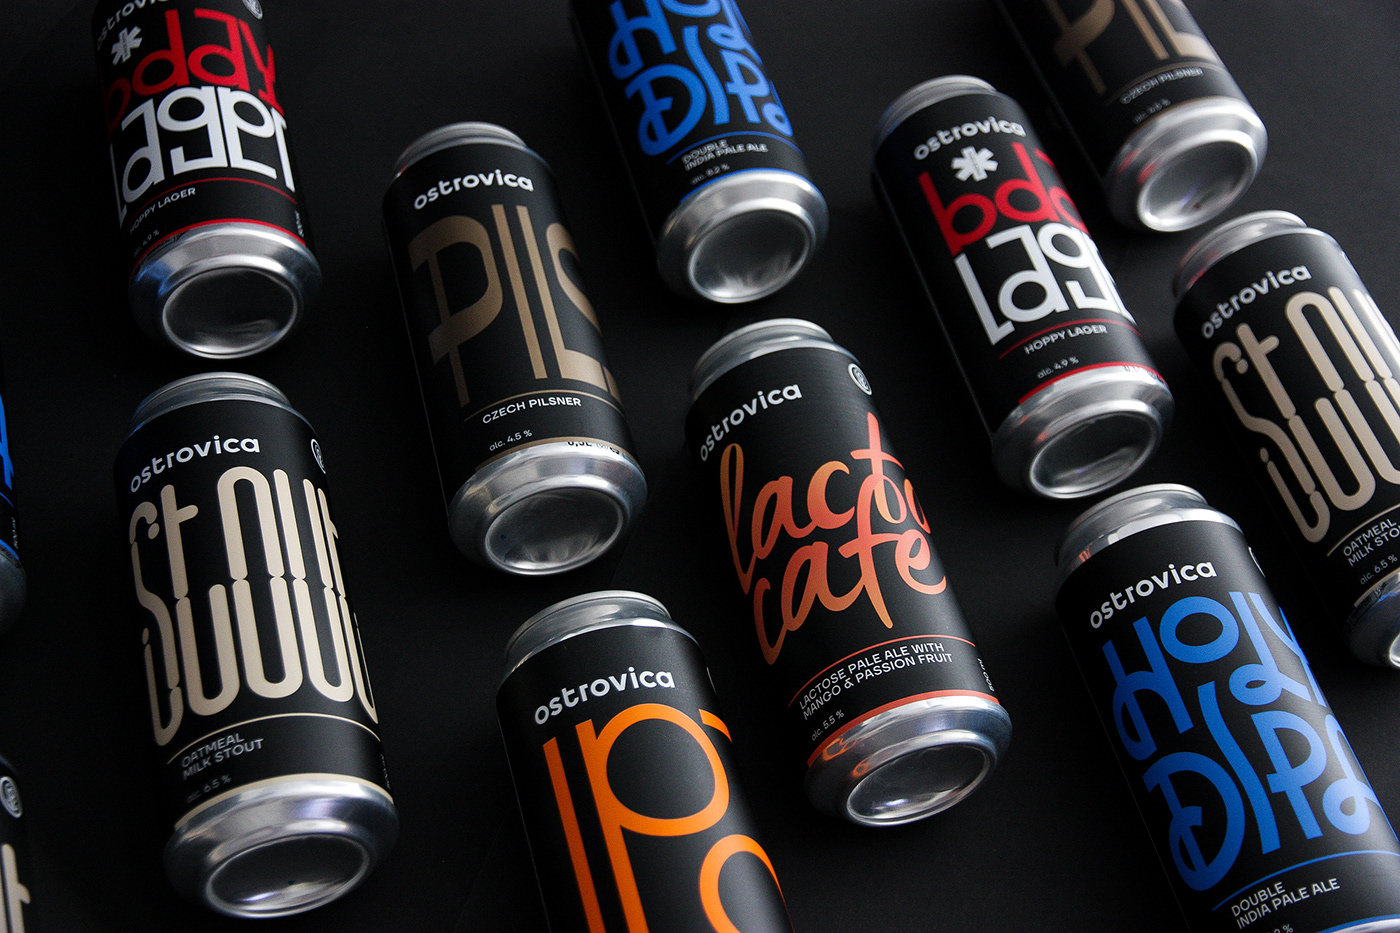 beer brew brewery can identity Label lettering ostrovica Packaging branding 